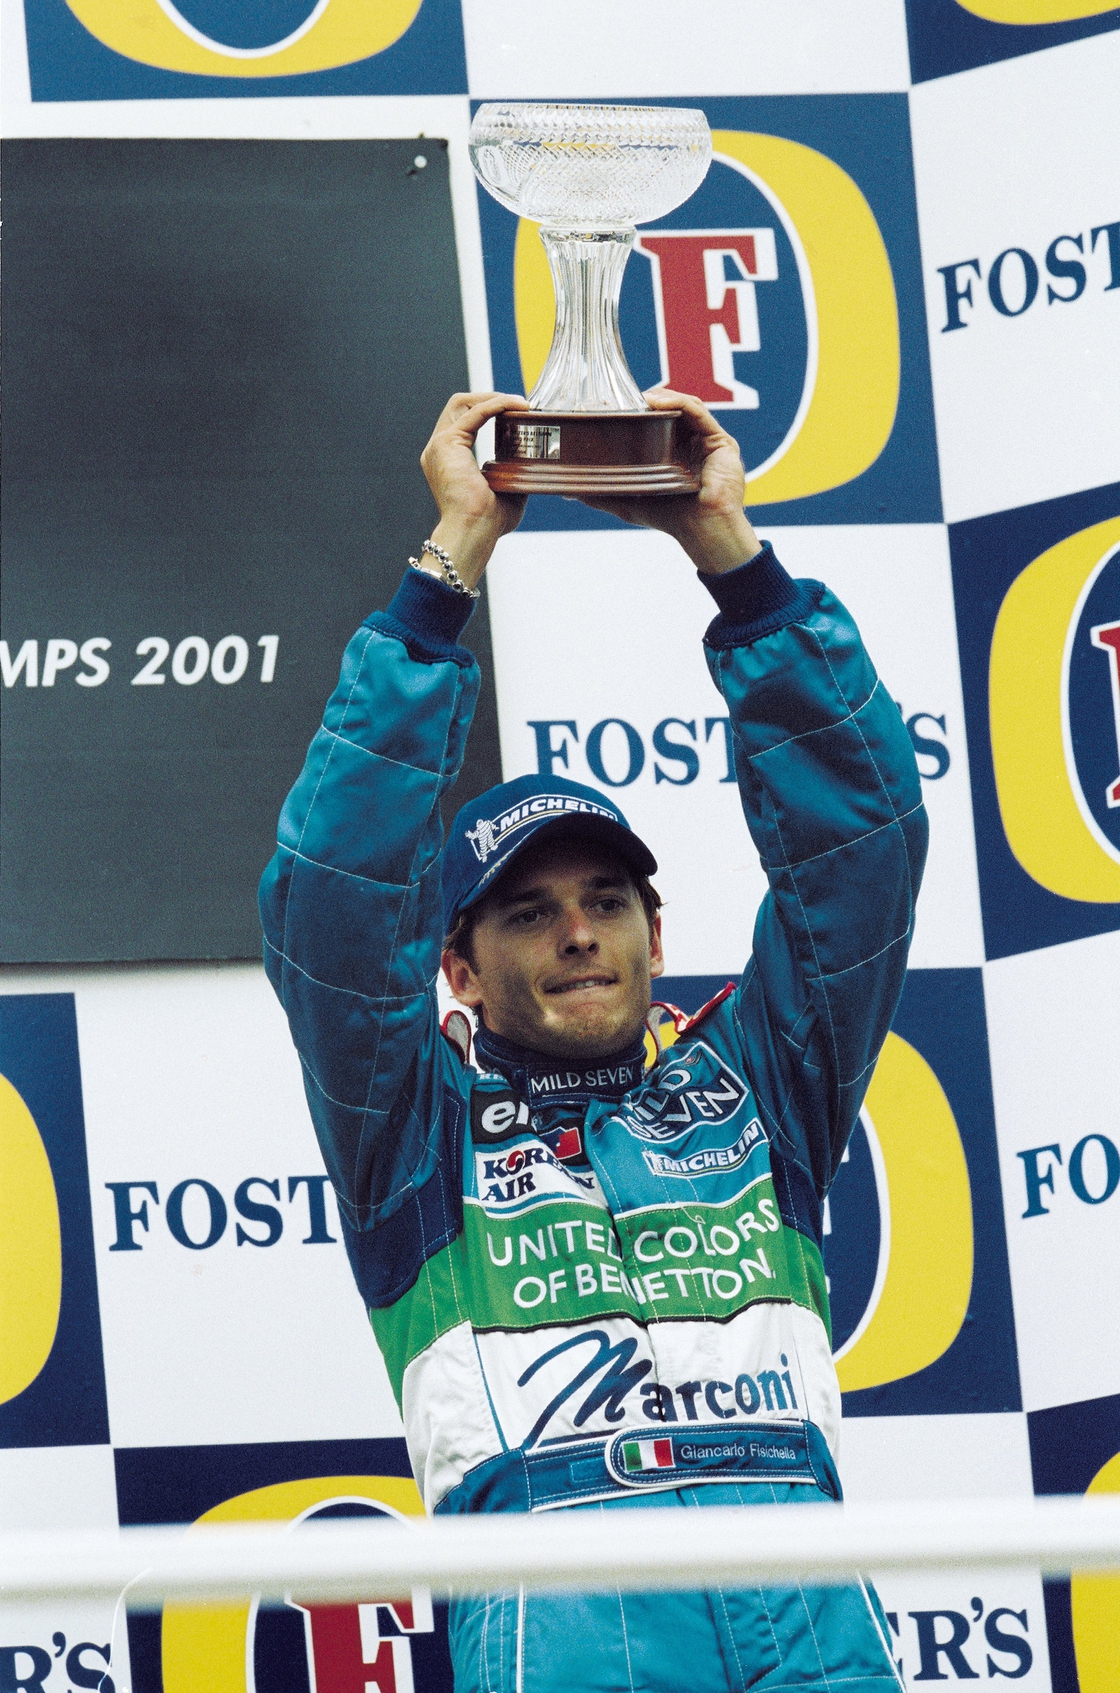 Image - Fisichella after finishing third in Spa in 2001 for Benetton